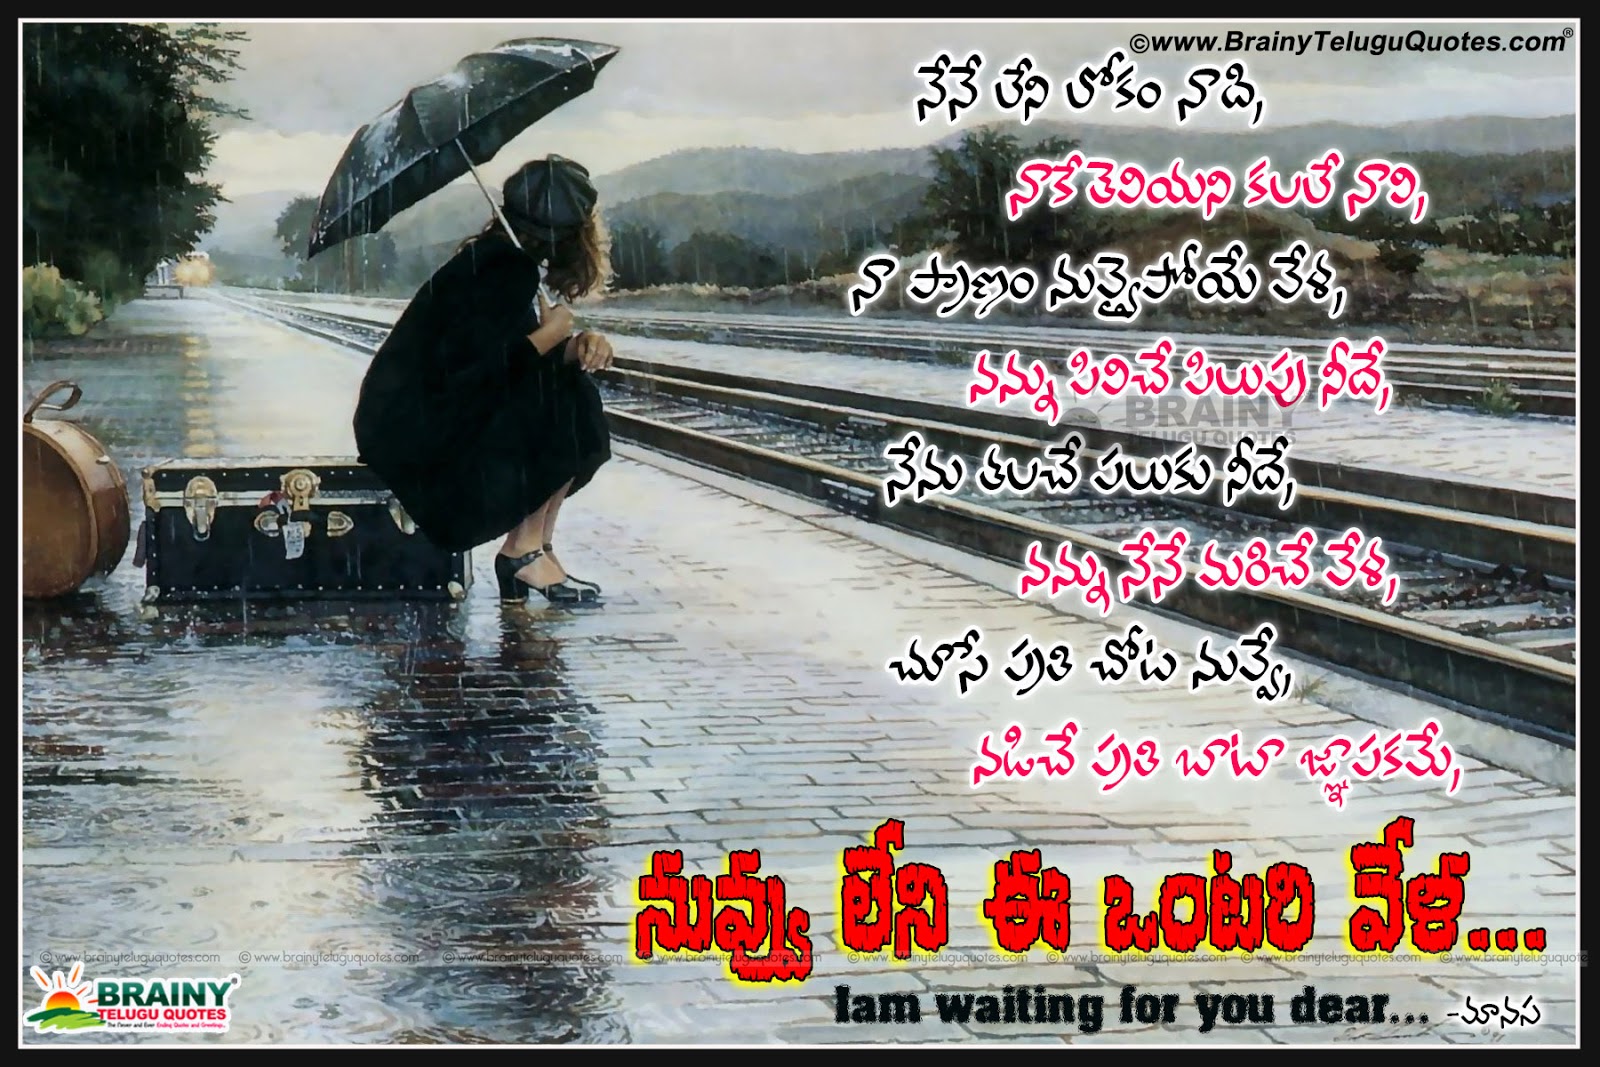 Here Is Telugu Love Quotations With Beautiful Love - Stimulus Image For Creative Writing , HD Wallpaper & Backgrounds